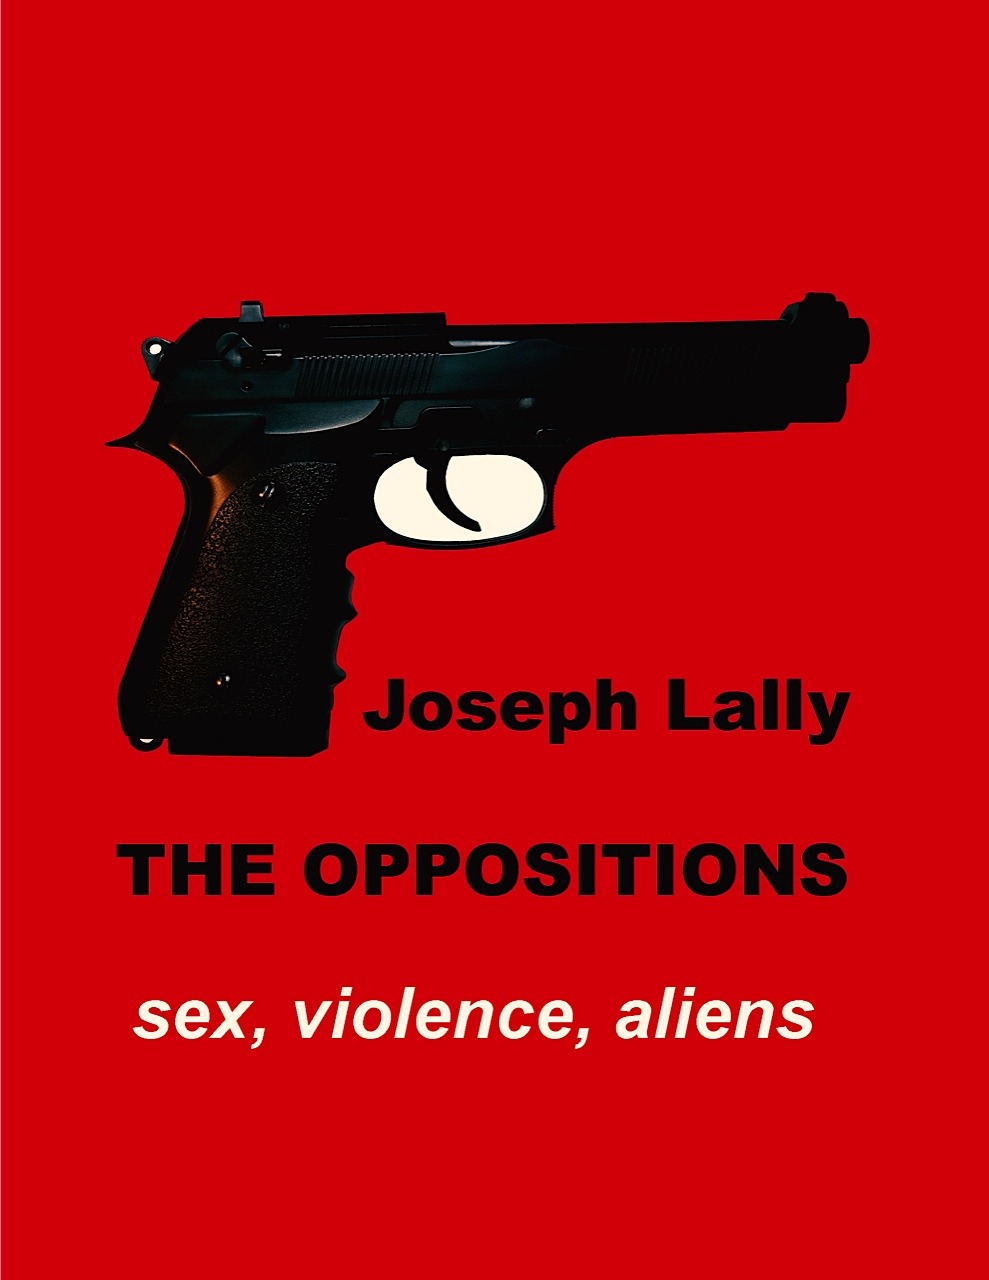 joseph-421-lally: “ Now you can get the Kindle edition: http://www.amazon.com/Oppositions-Takeover-Mind-Children-Good-ebook/dp/B018RUW8YK/ref=sr_1_2?s=books&ie=UTF8&qid=1450359509&sr=1-2 ”